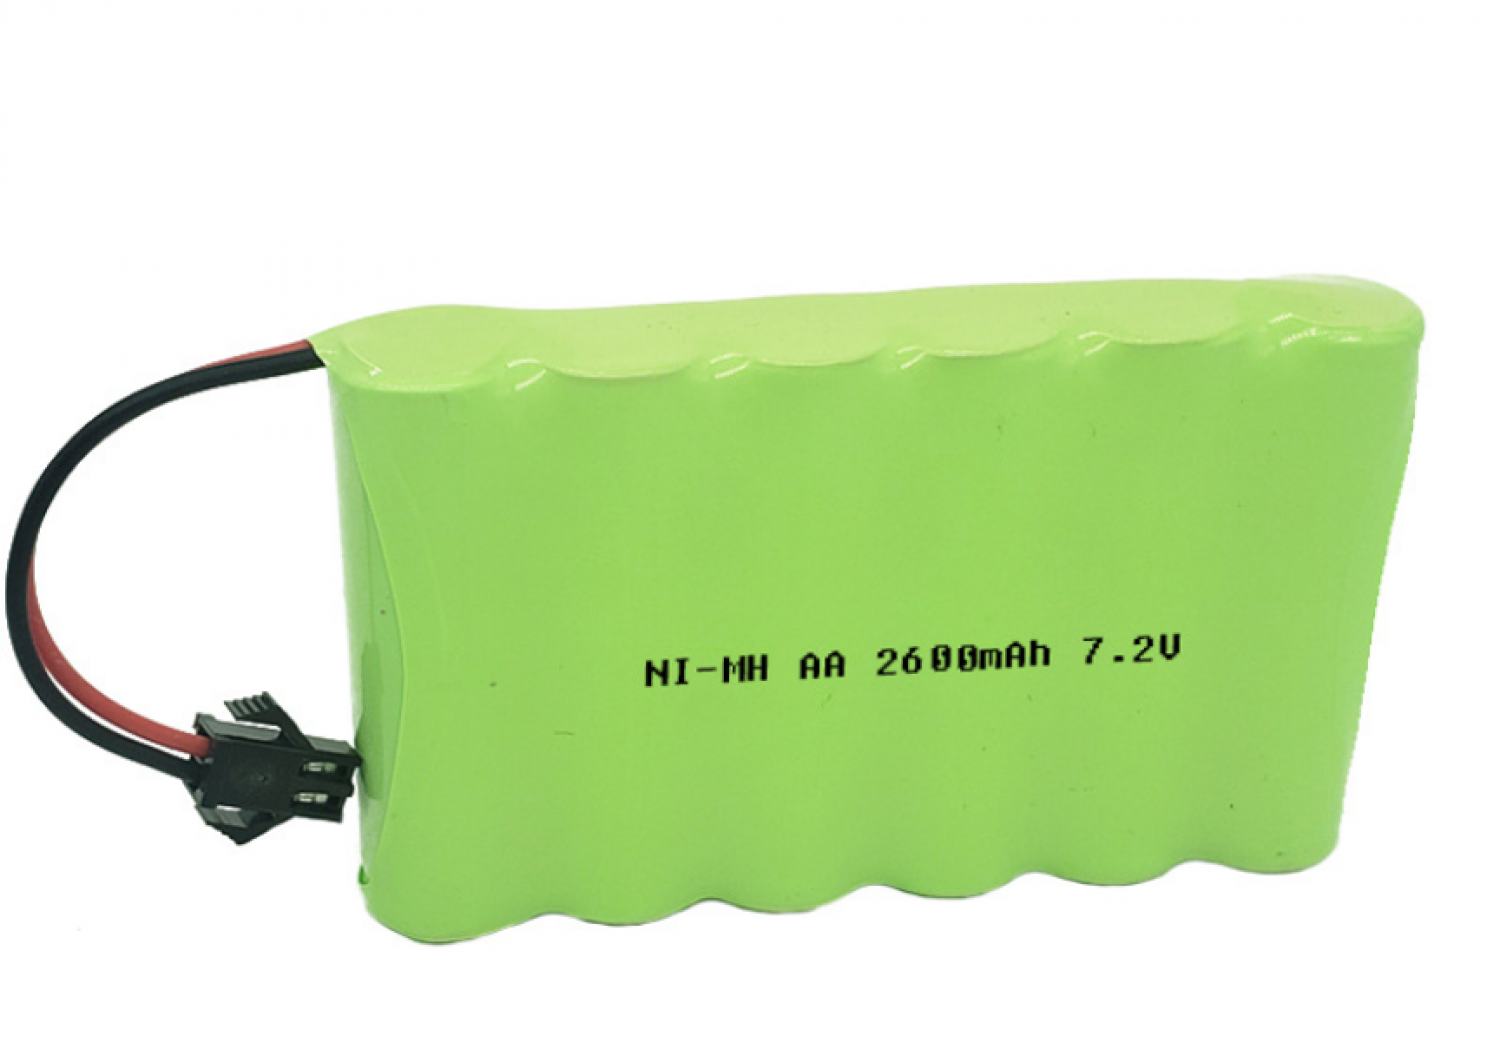 The Advantage and Disadvantage of NiMH Batteries